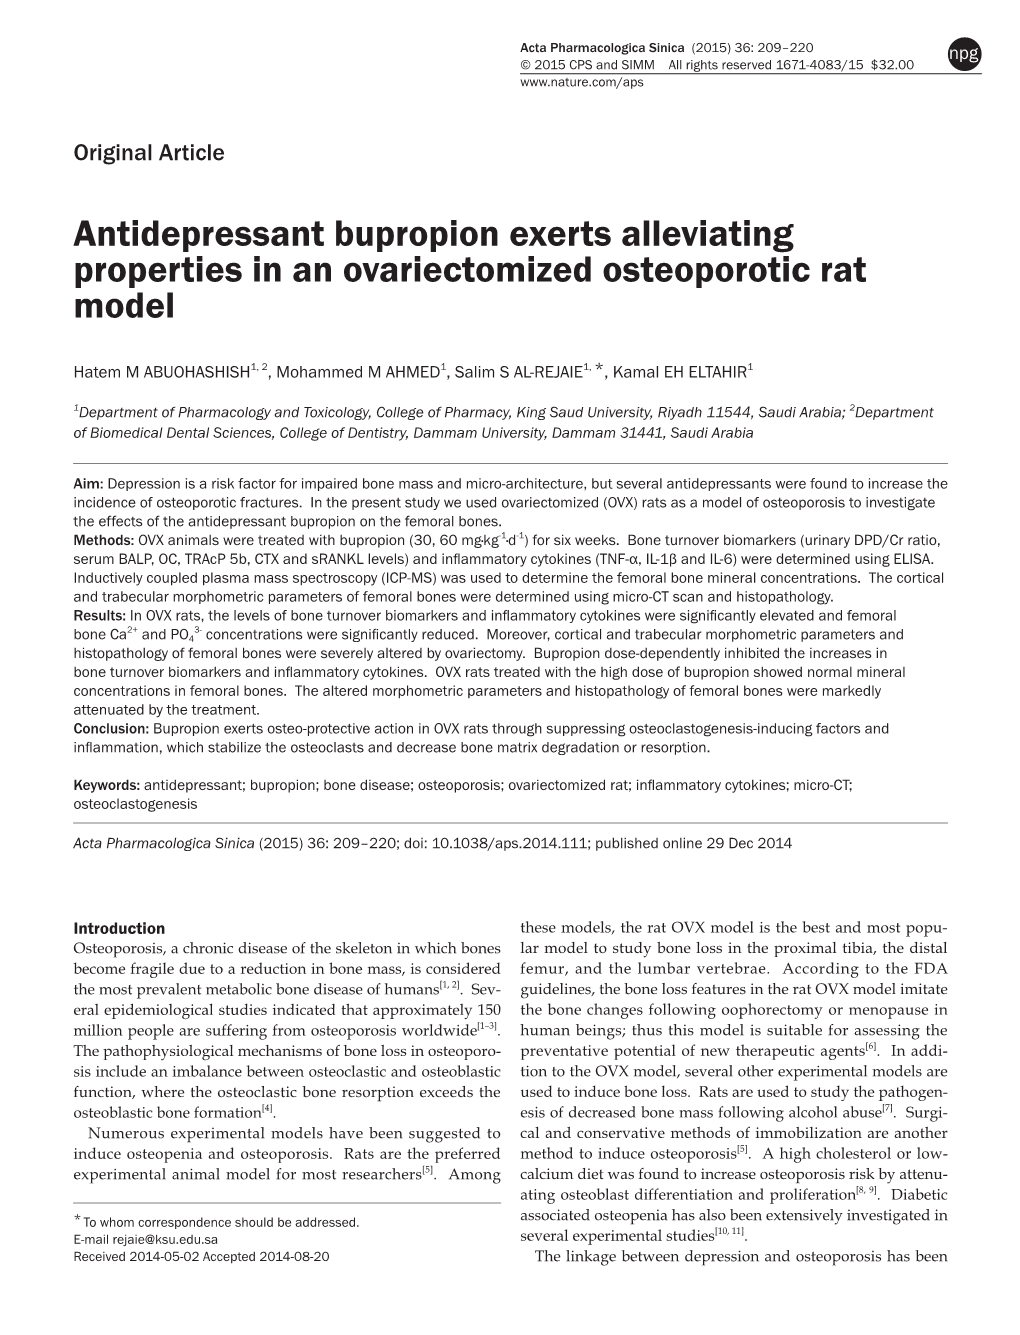 The Antidepressant Bupropion Exerts Alleviating Properties in An